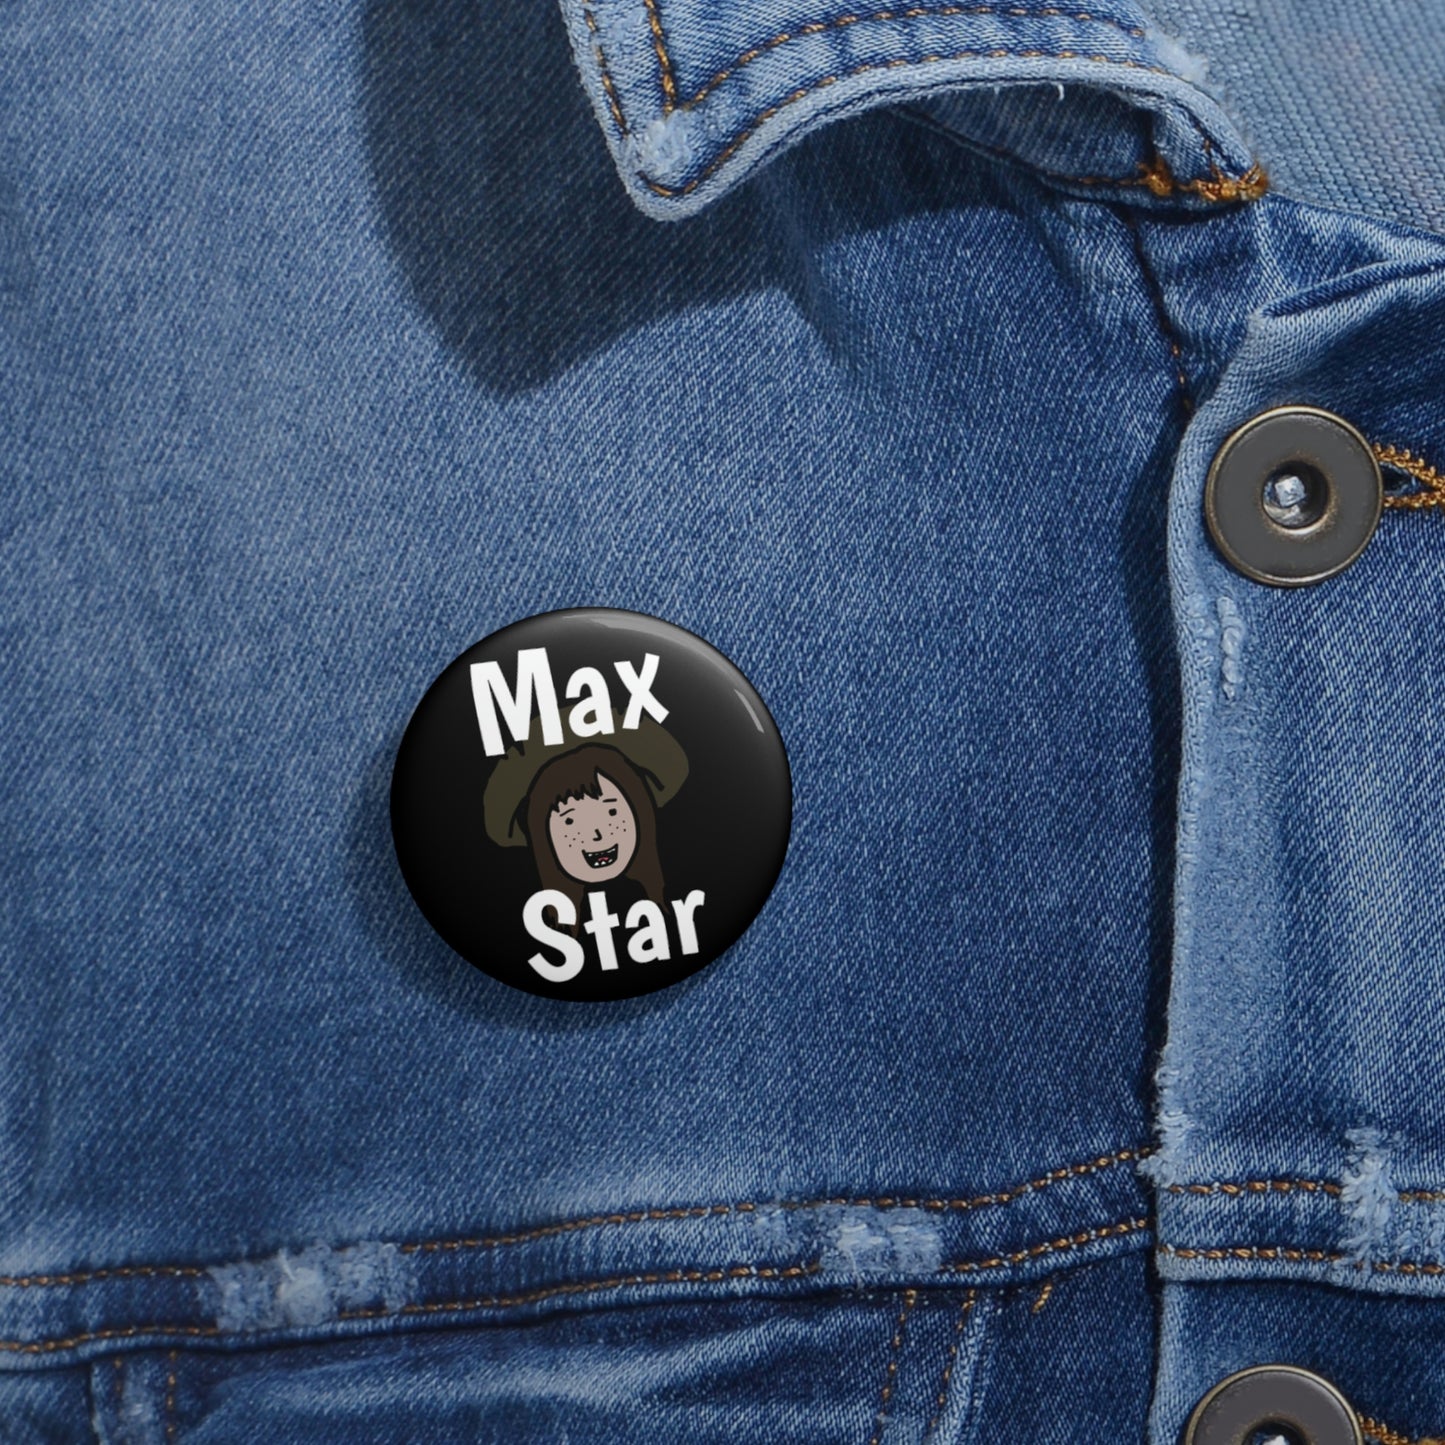 Max Star - The Official Pin of The Goodbye Family